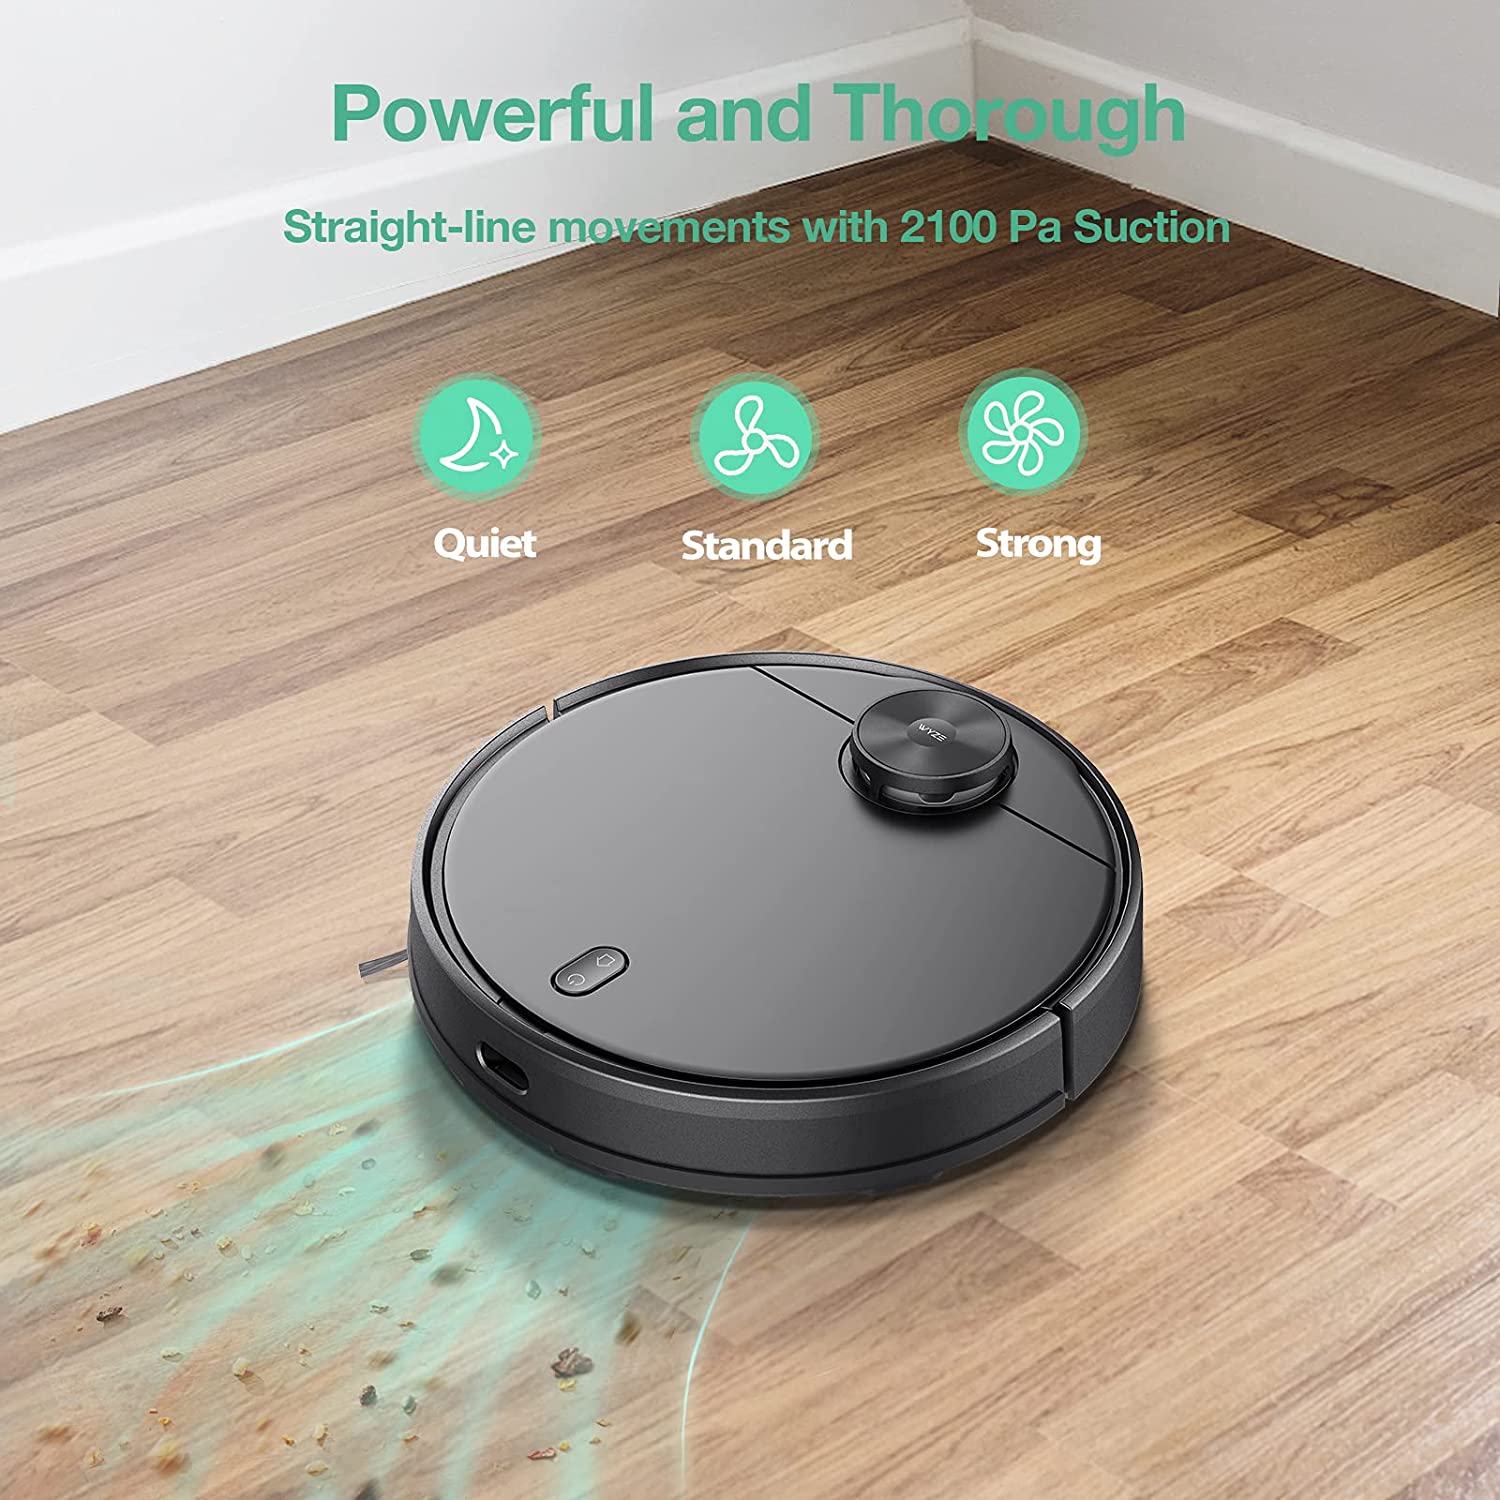 Wyze Robot Vacuum with LiDAR Room Mapping, 2,100Pa Strong Suction, Straight-line Movements, Virtual Walls, Ideal for Pet Hair, Hard Floors and Carpets, Wi-Fi Connected Robotic Vacuum & Self-Charging - image 3 of 8